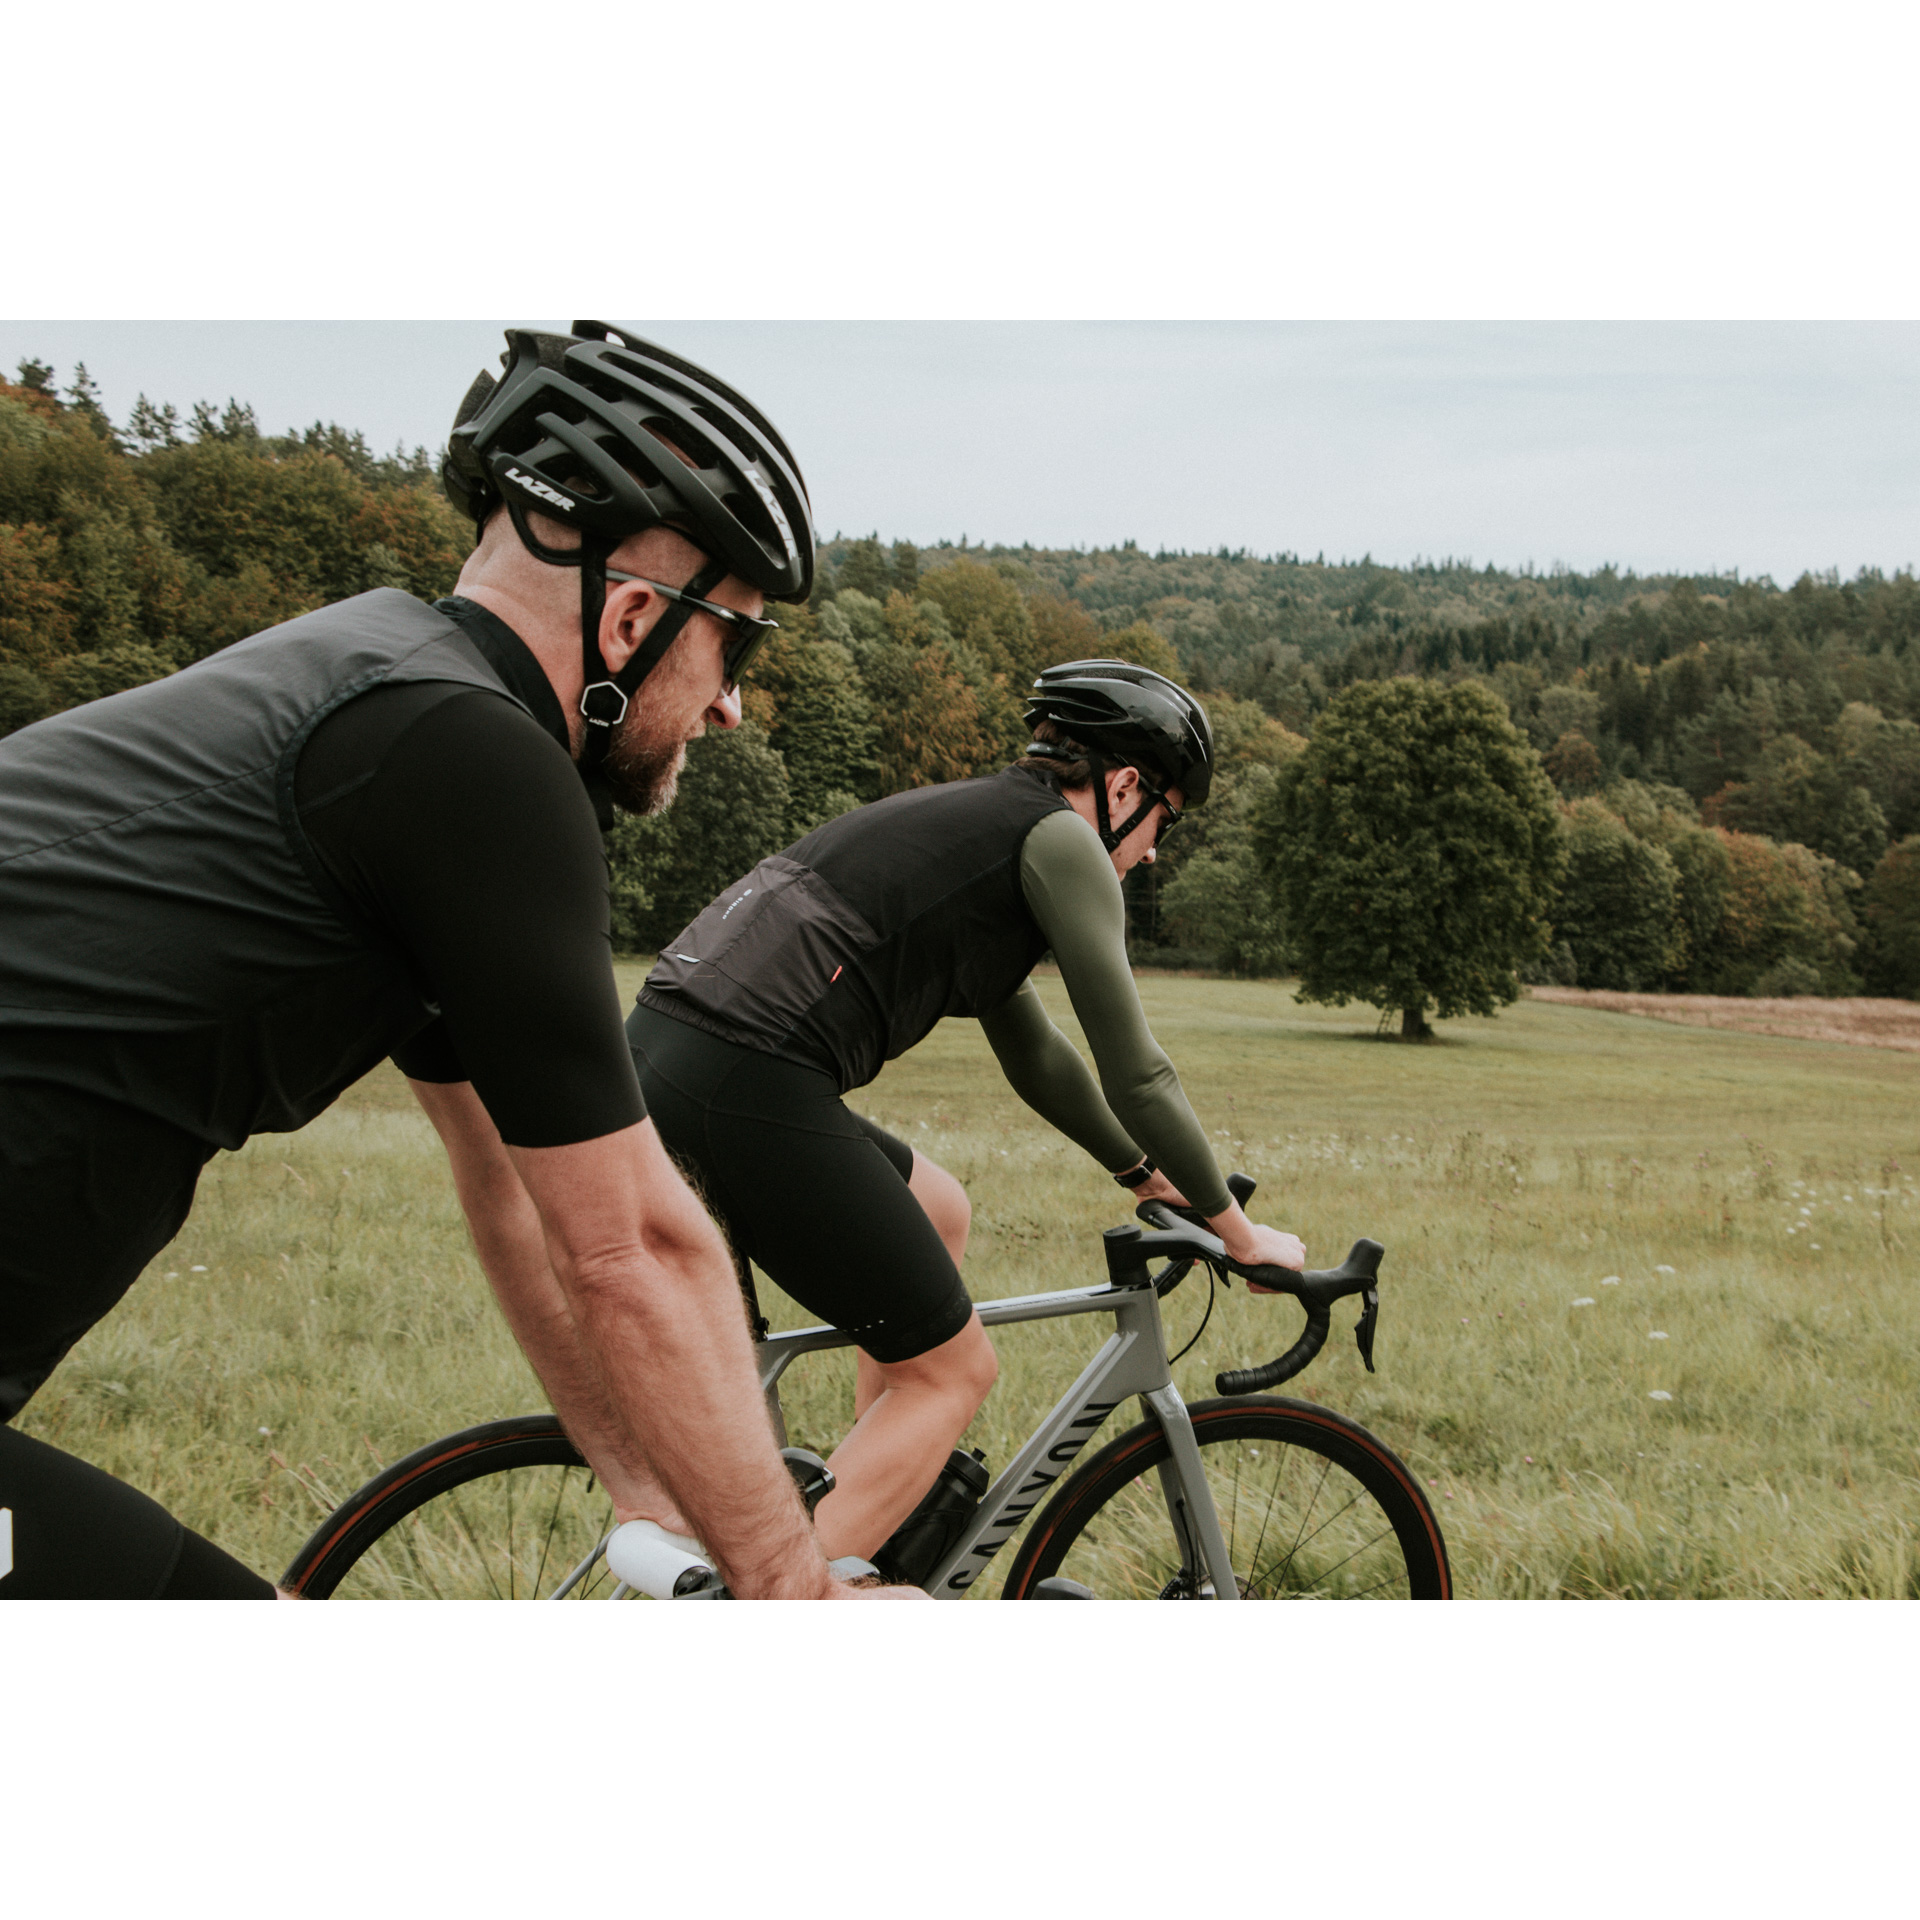 Two cyclists in black clothes and helmets riding bicycles against the background of a green glade and a dense forest in the distance